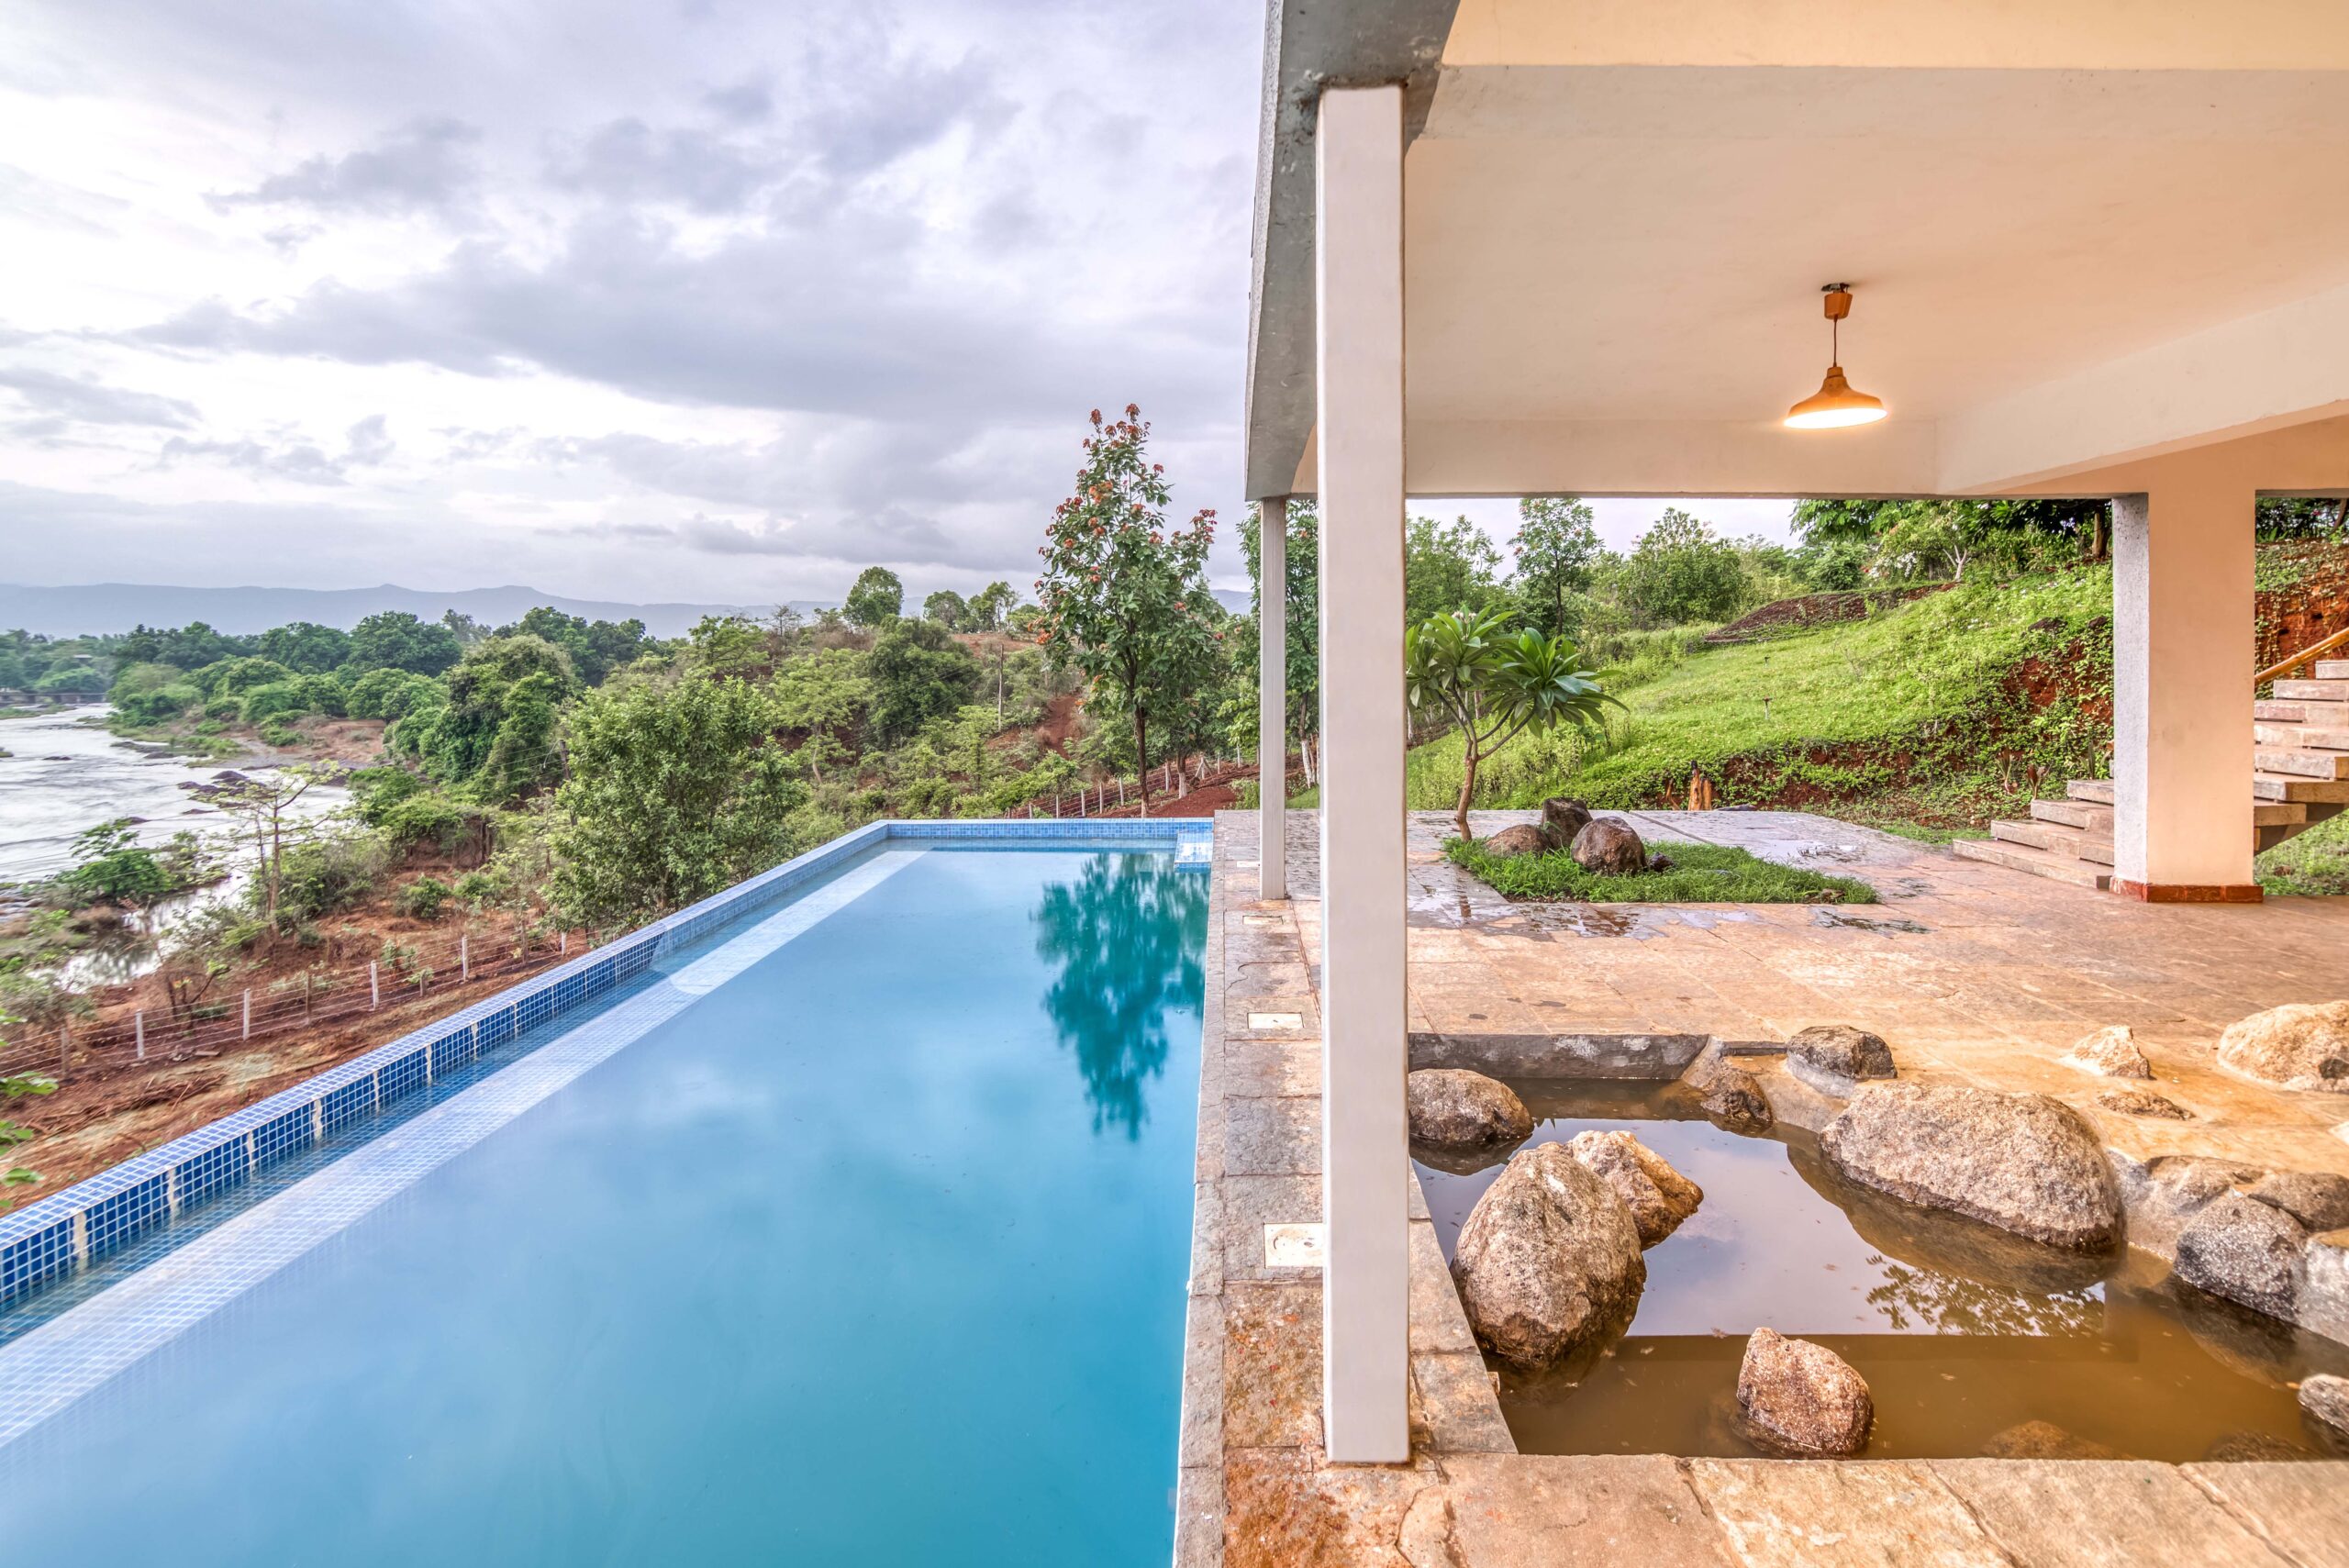 Renting a Villa is the Ultimate Vacation Experience